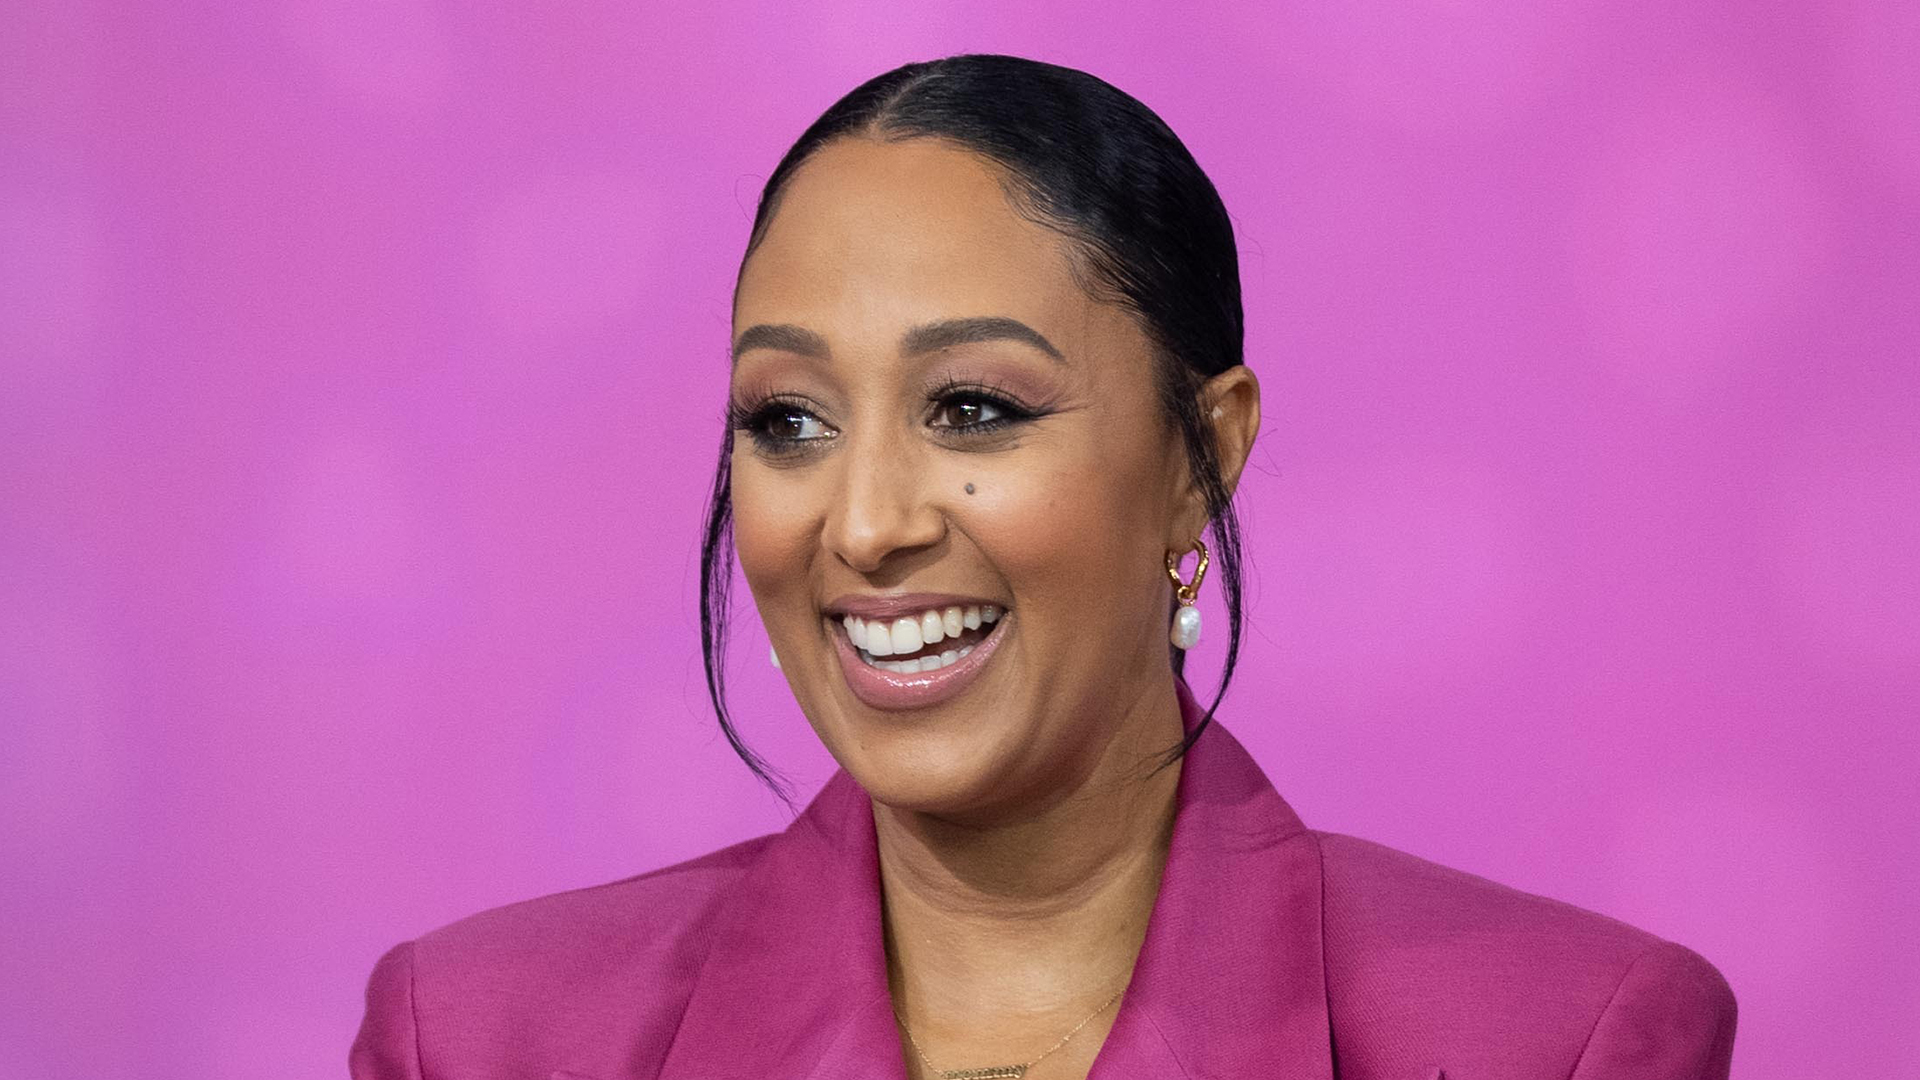 Tamera Mowry-Housley opens up on new book, Tia's divorce